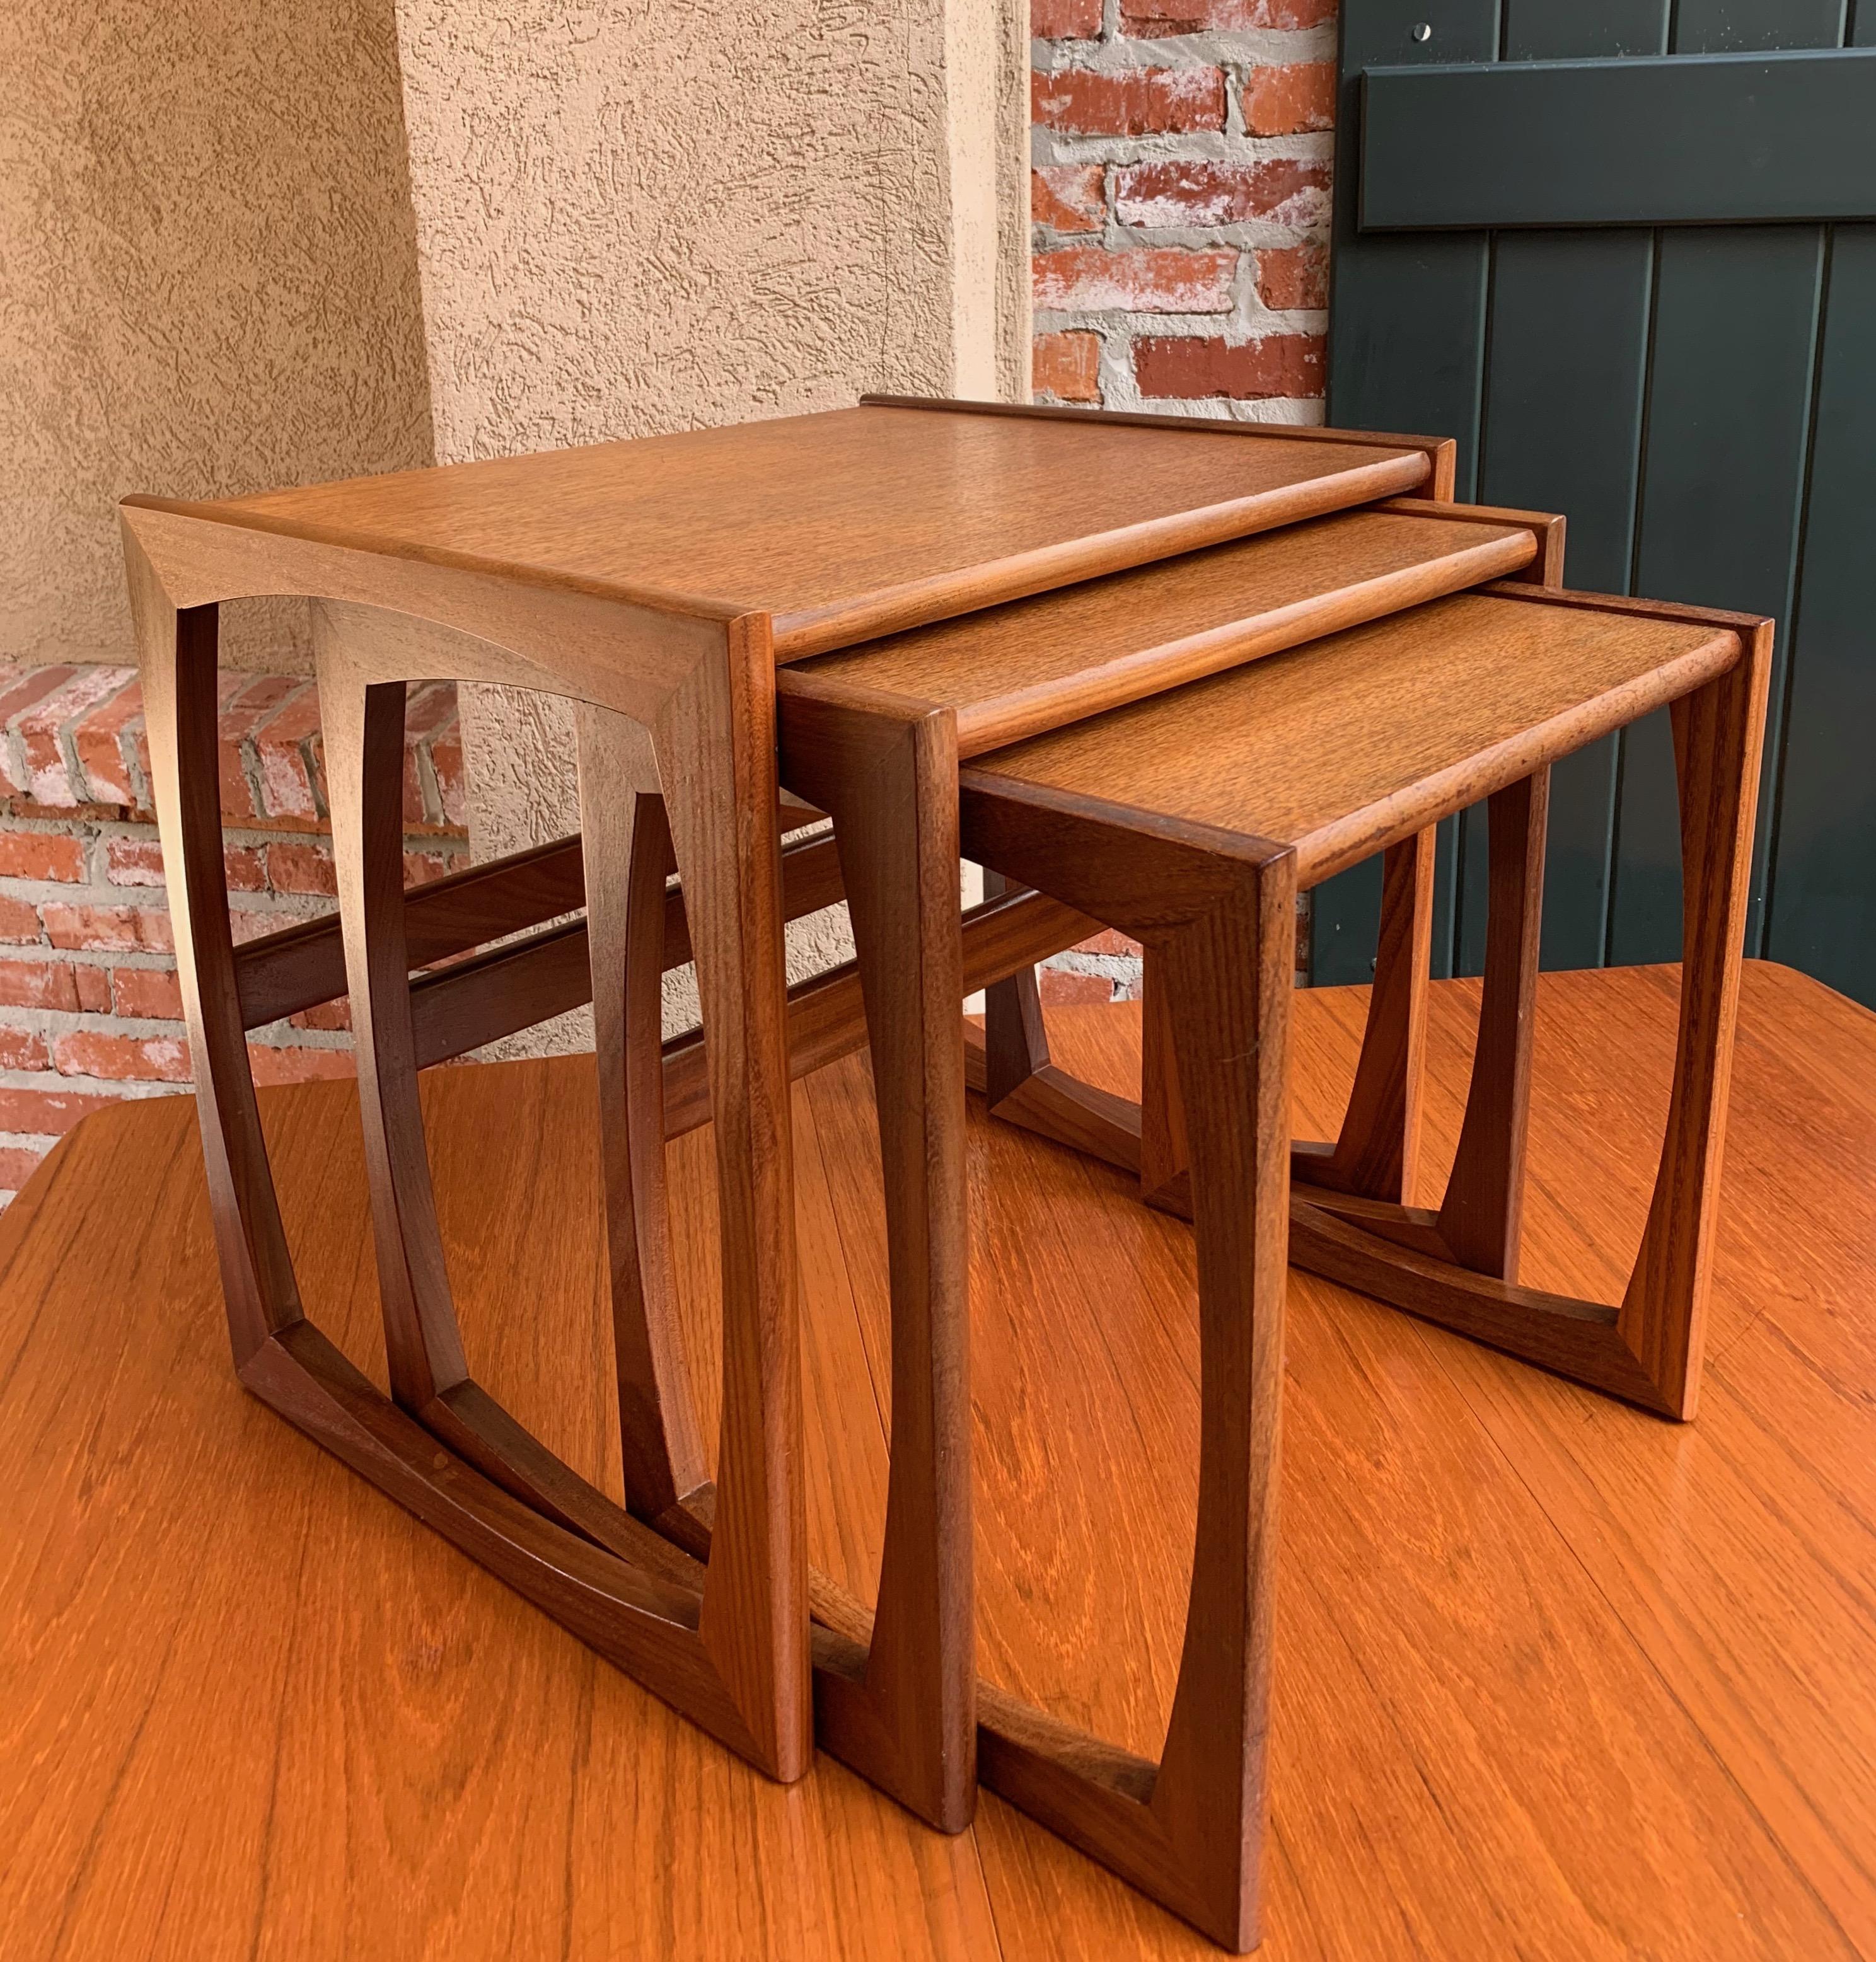 Direct from England, a lovely set of 3 nesting tables
~ Mid-Century Modern styling with gorgeous teak veneer
~ G Plan tag on the underside,
~ circa 1960
(Note: We recently purchased several of these Mid-Century Modern nesting tables and dining